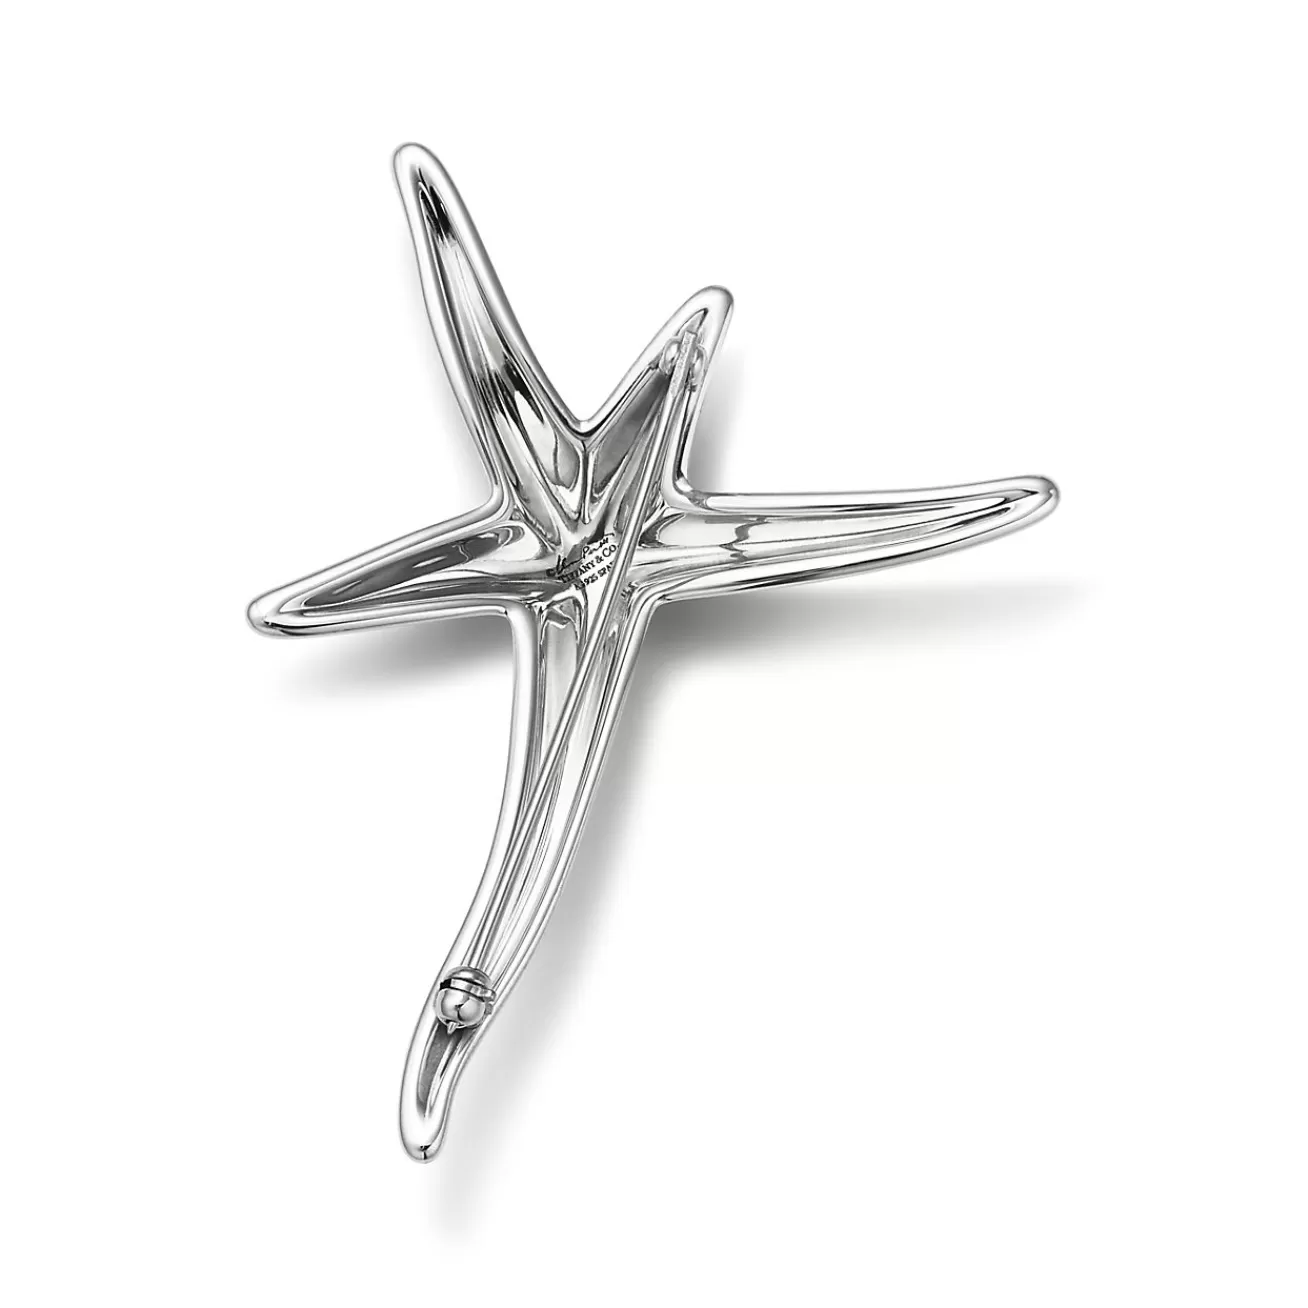 Tiffany & Co. Elsa Peretti® Starfish brooch in sterling silver, large. | ^ Brooches | Sterling Silver Jewelry